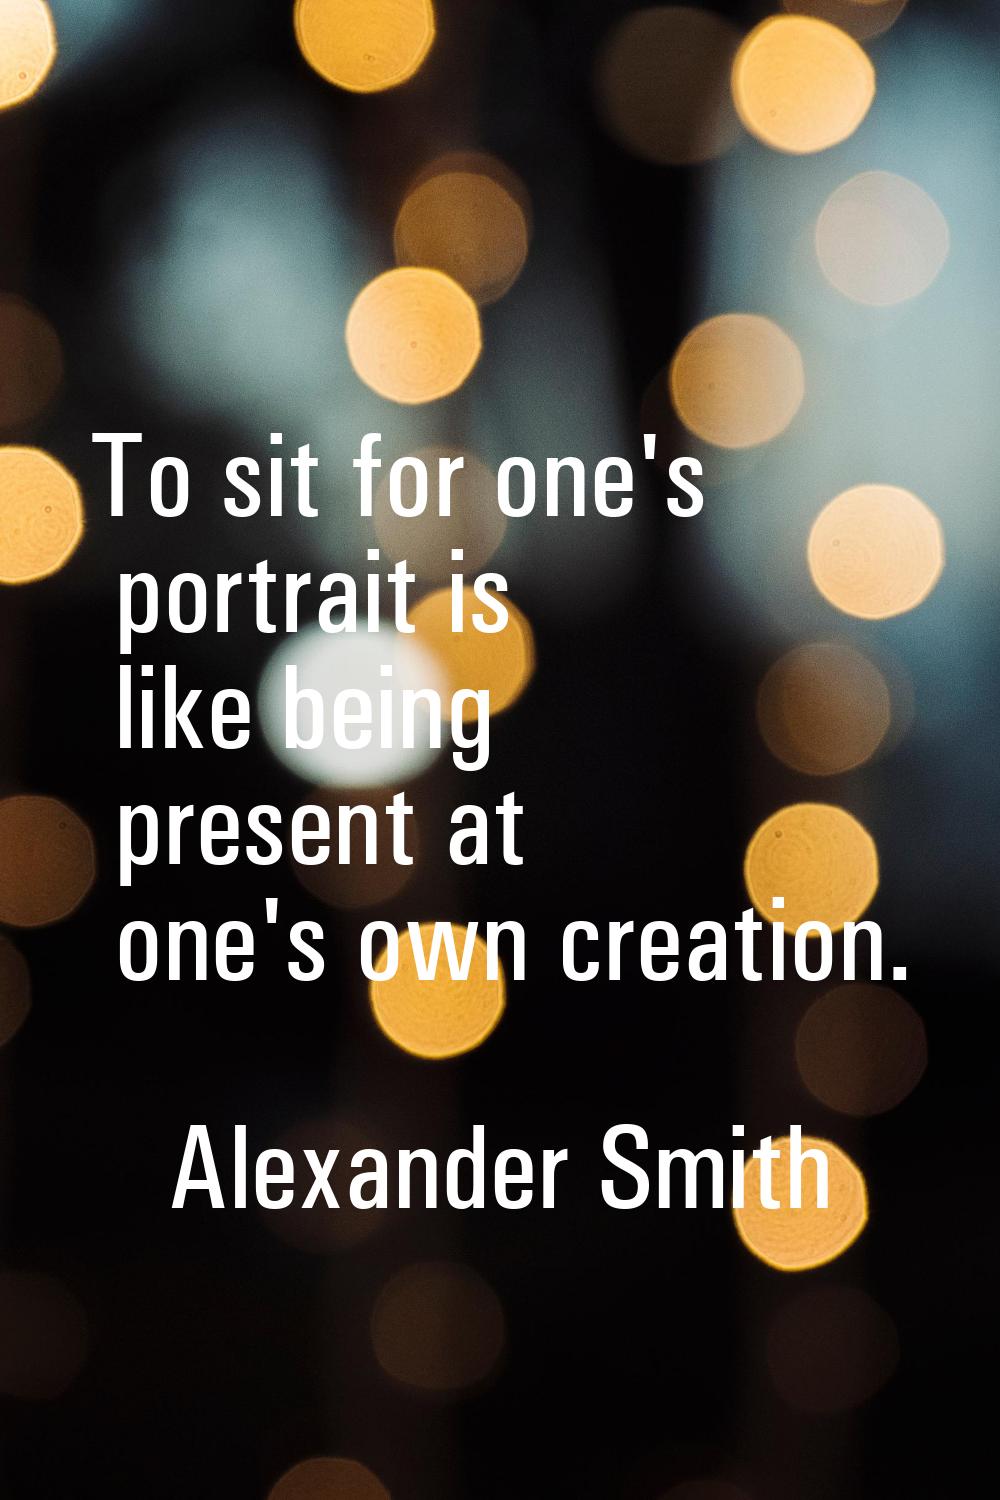 To sit for one's portrait is like being present at one's own creation.